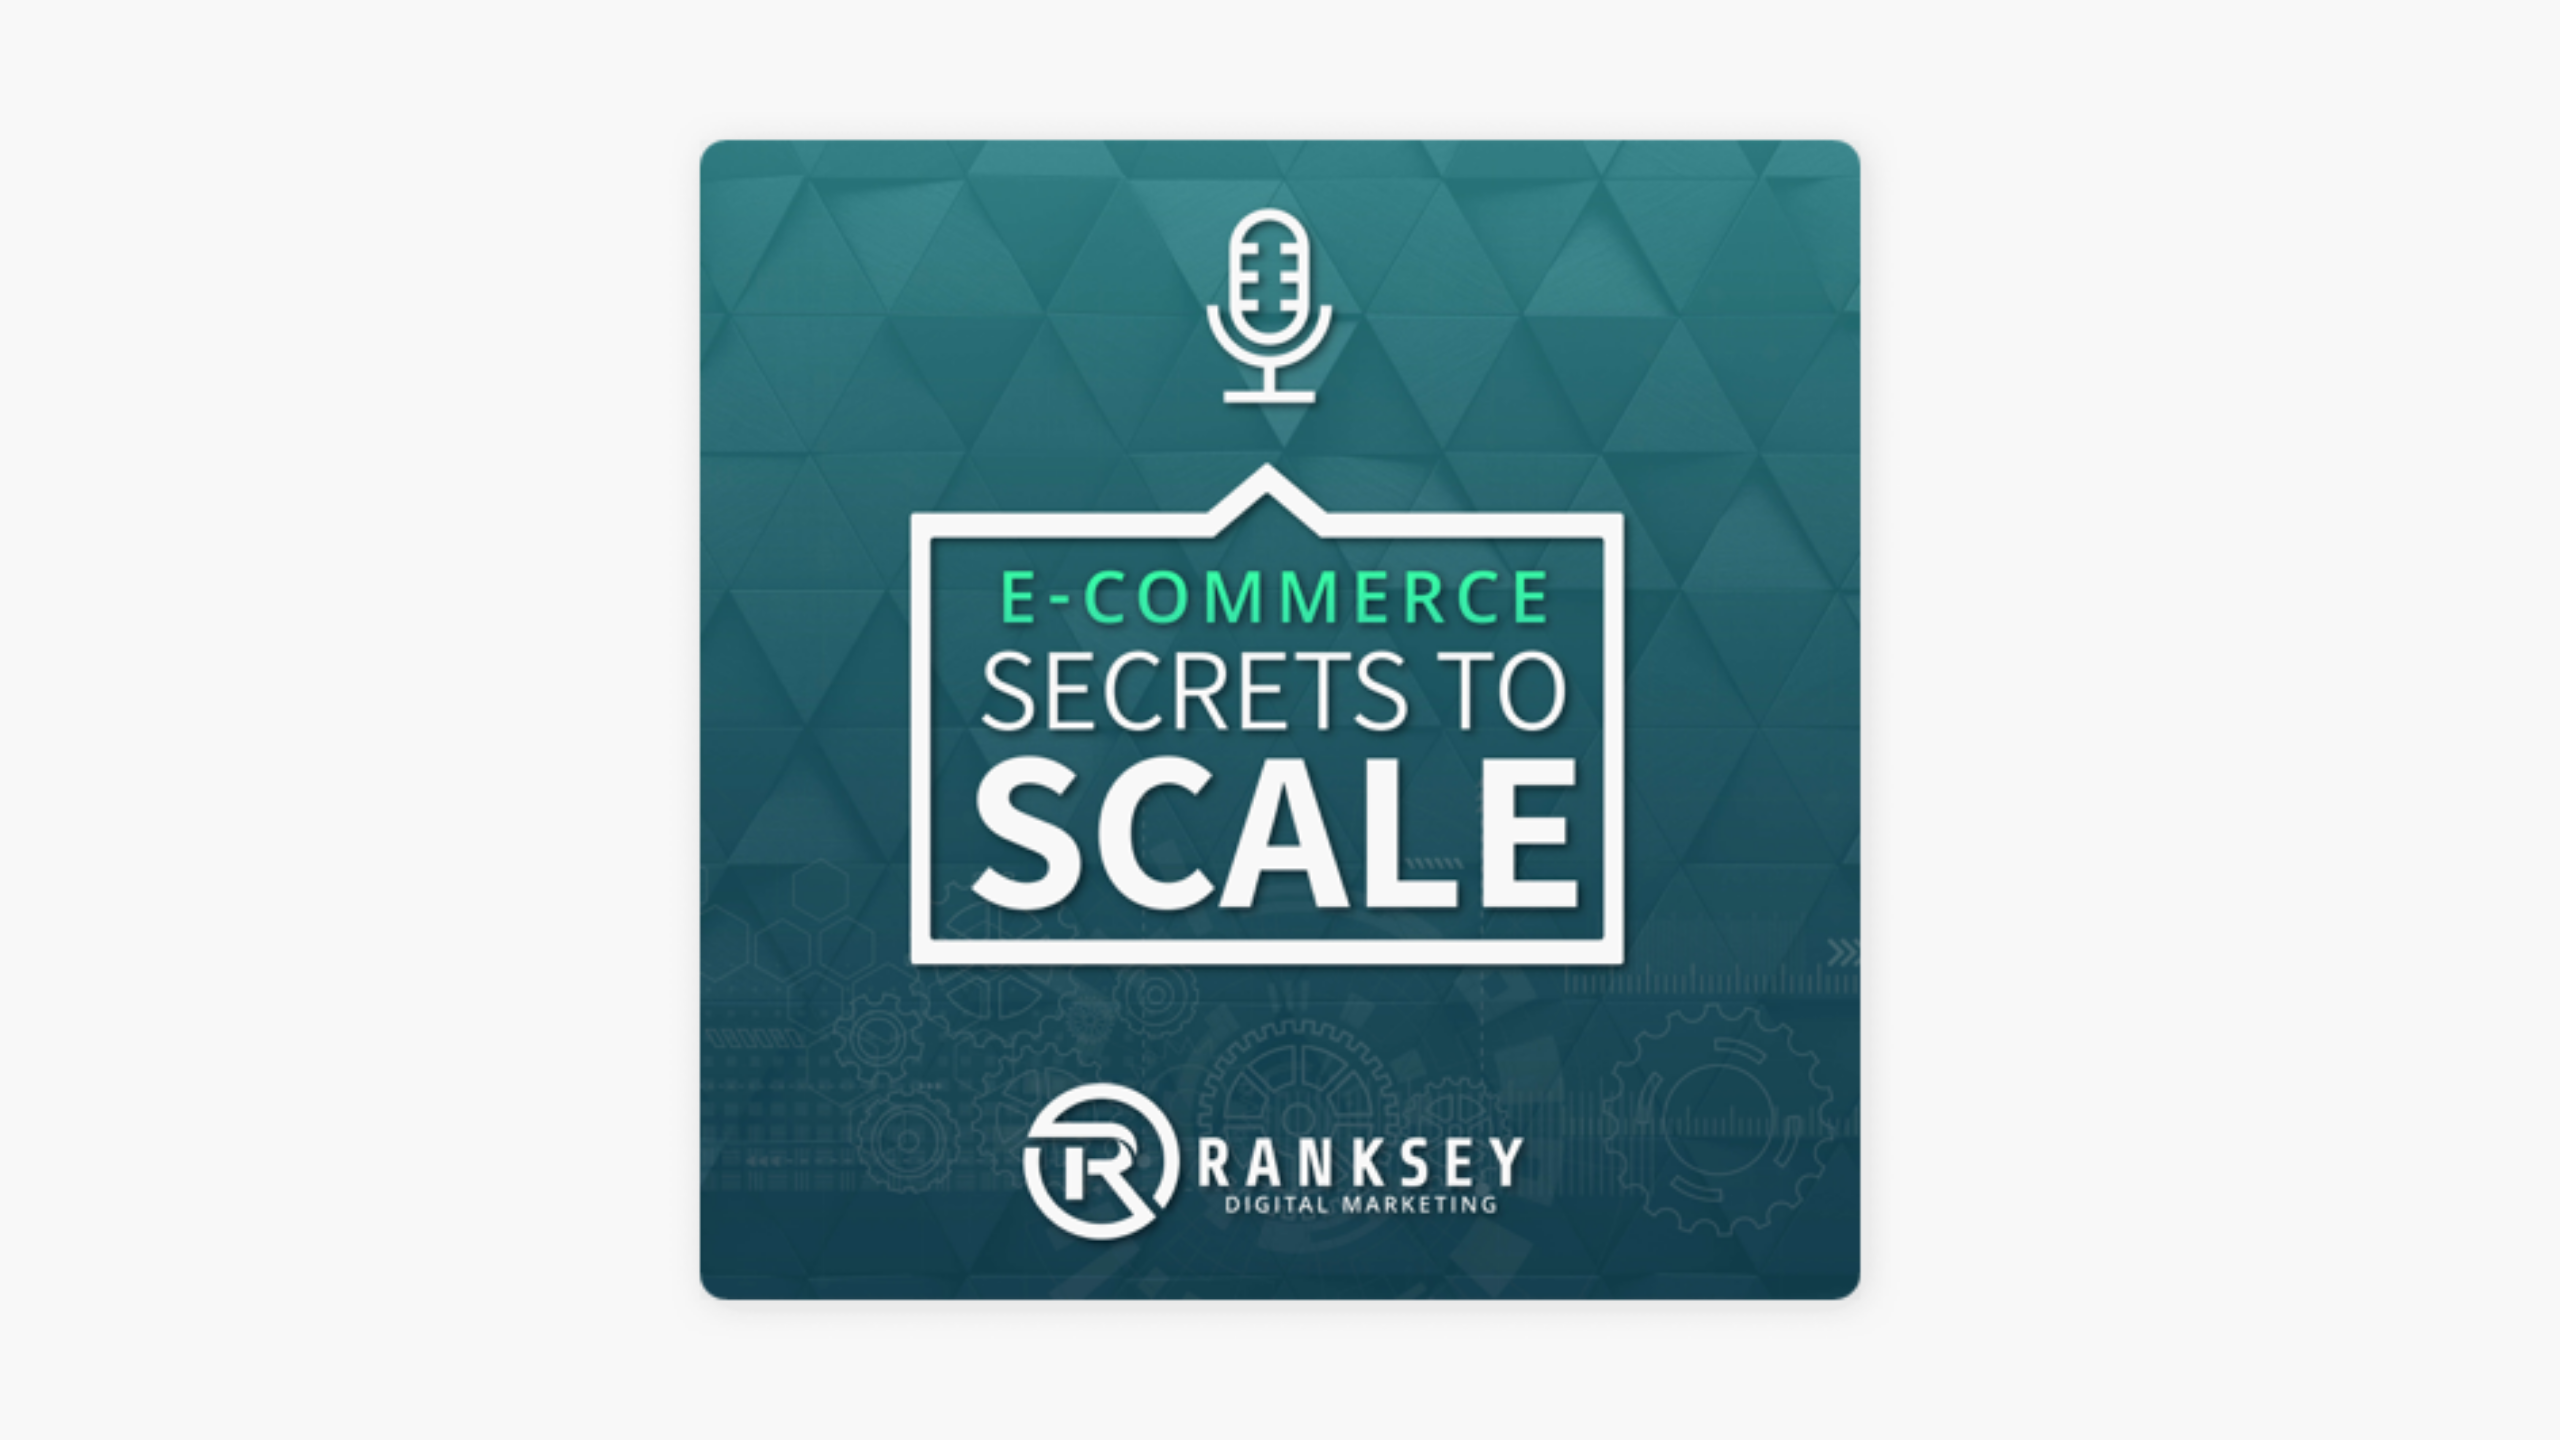 A teal square graphic with a geometric background features a microphone icon above the text "E-Commerce Secrets to Scale." Below, the logo for "Ranksey Digital Marketing" is displayed with an abstract gear design.